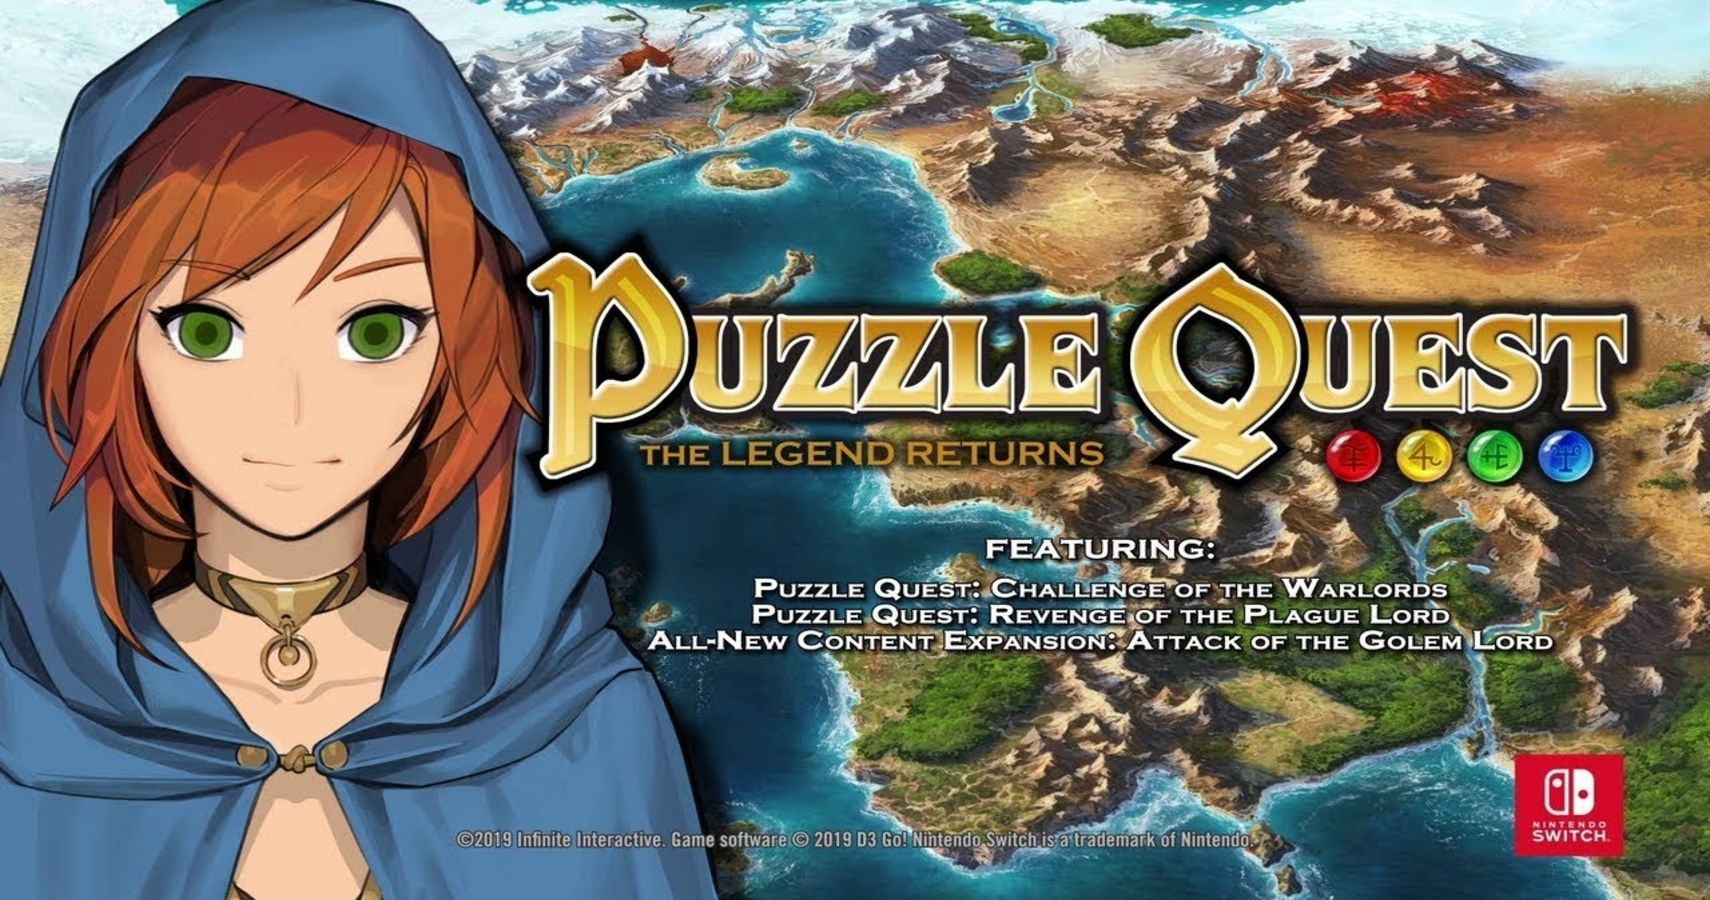 The legendary return. Puzzle Quest: the Legend Returns. Puzzle Quest 3. Puzzle Quest Challenge of the Warlords.